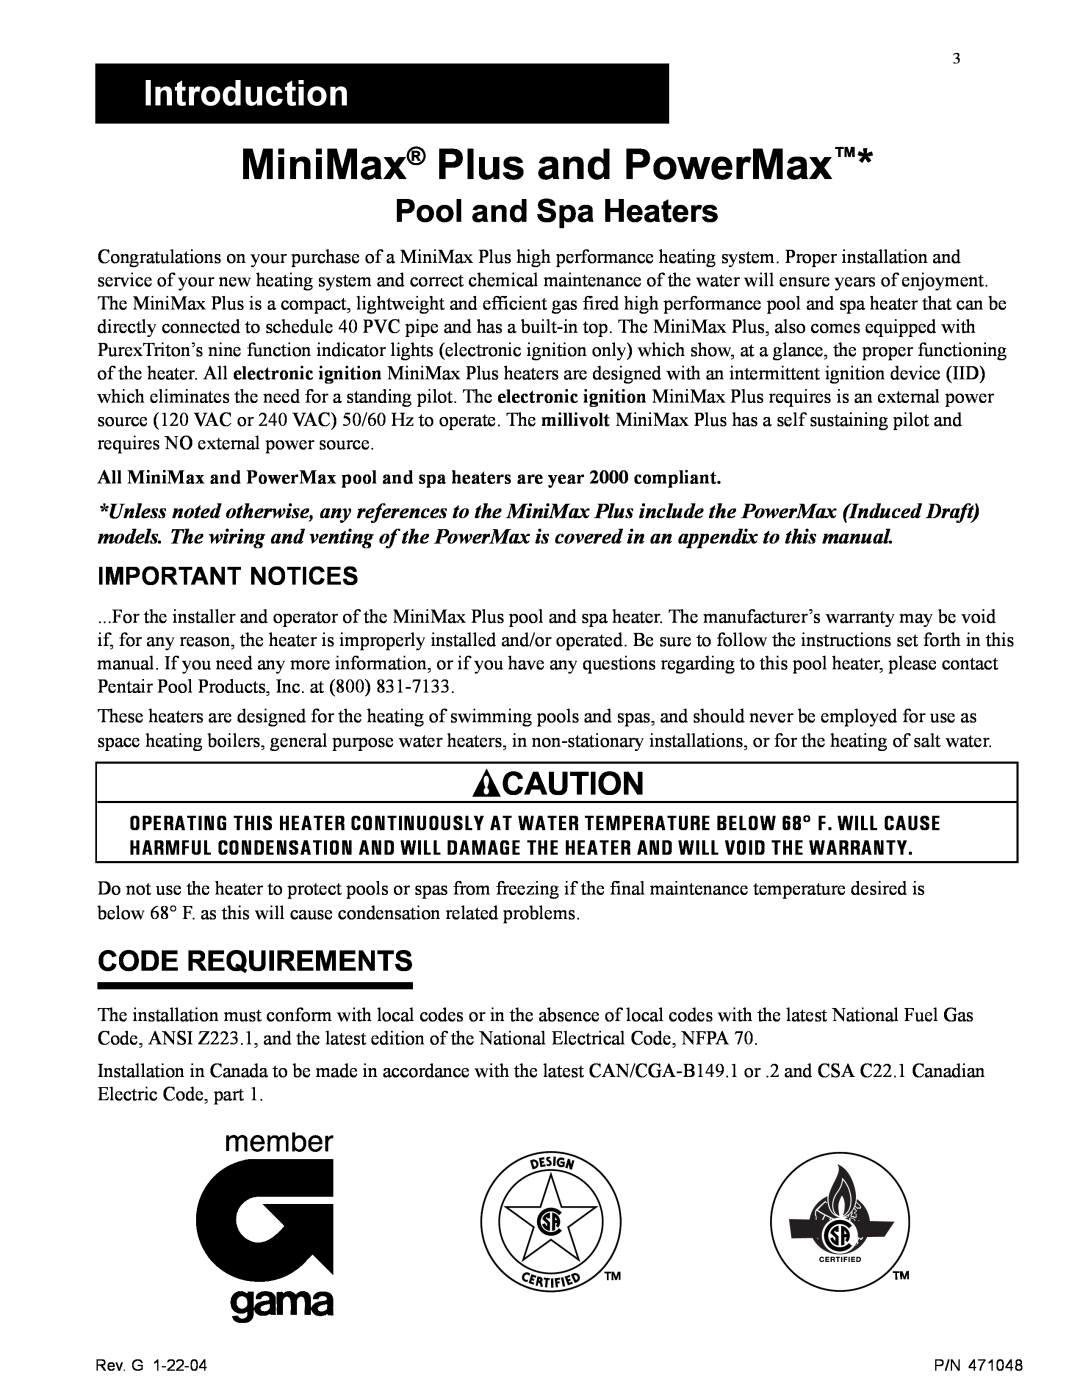 Pentair MiniMax Plus HP Series, PowerMax Introduction, Pool and Spa Heaters, Code Requirements, Important Notices 